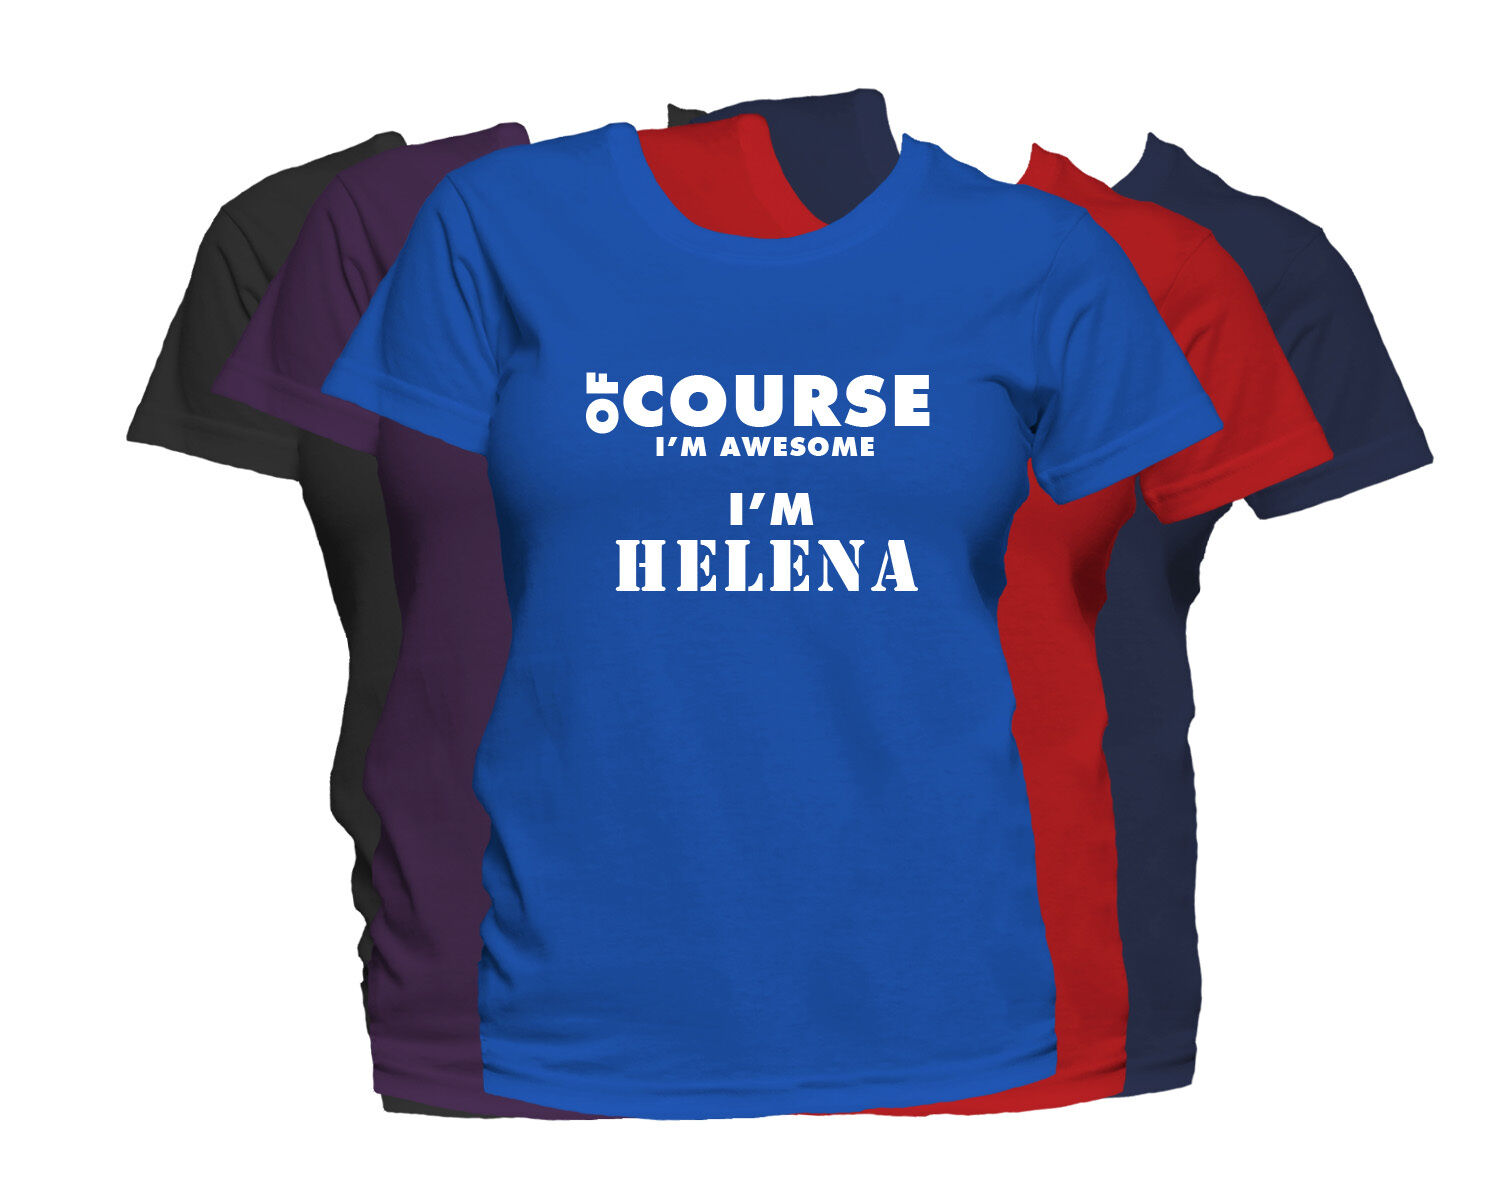 HELENA First Name Women\'s T-Shirt Of Course I\'m Awesome Ladies Tee